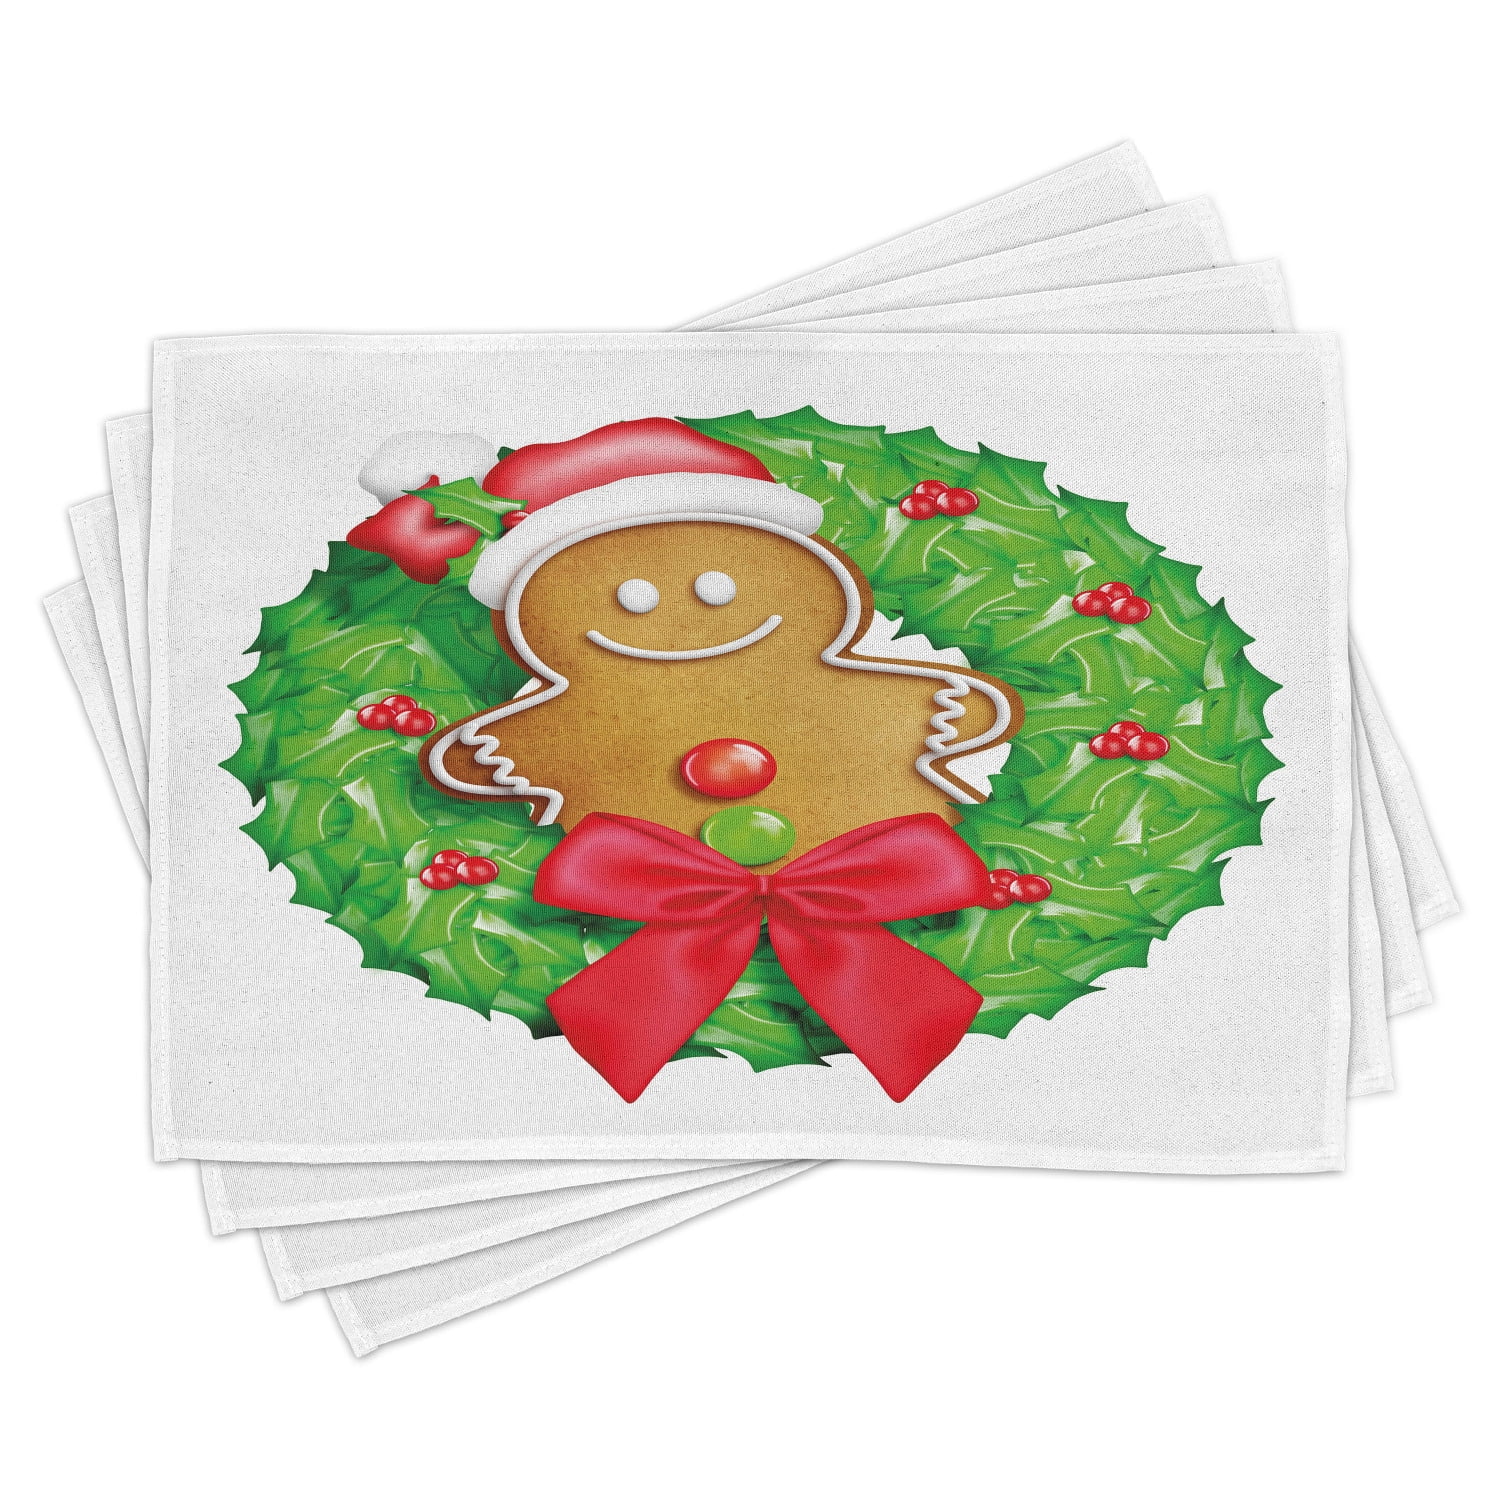 Gingerbread Man Placemats Set of 4 Cartoon Christmas Wreath with Gingerbread  Man Funny Happy Season, Washable Fabric Place Mats for Dining Room Kitchen  Table Decor,Green Red Pale Brown, by Ambesonne 